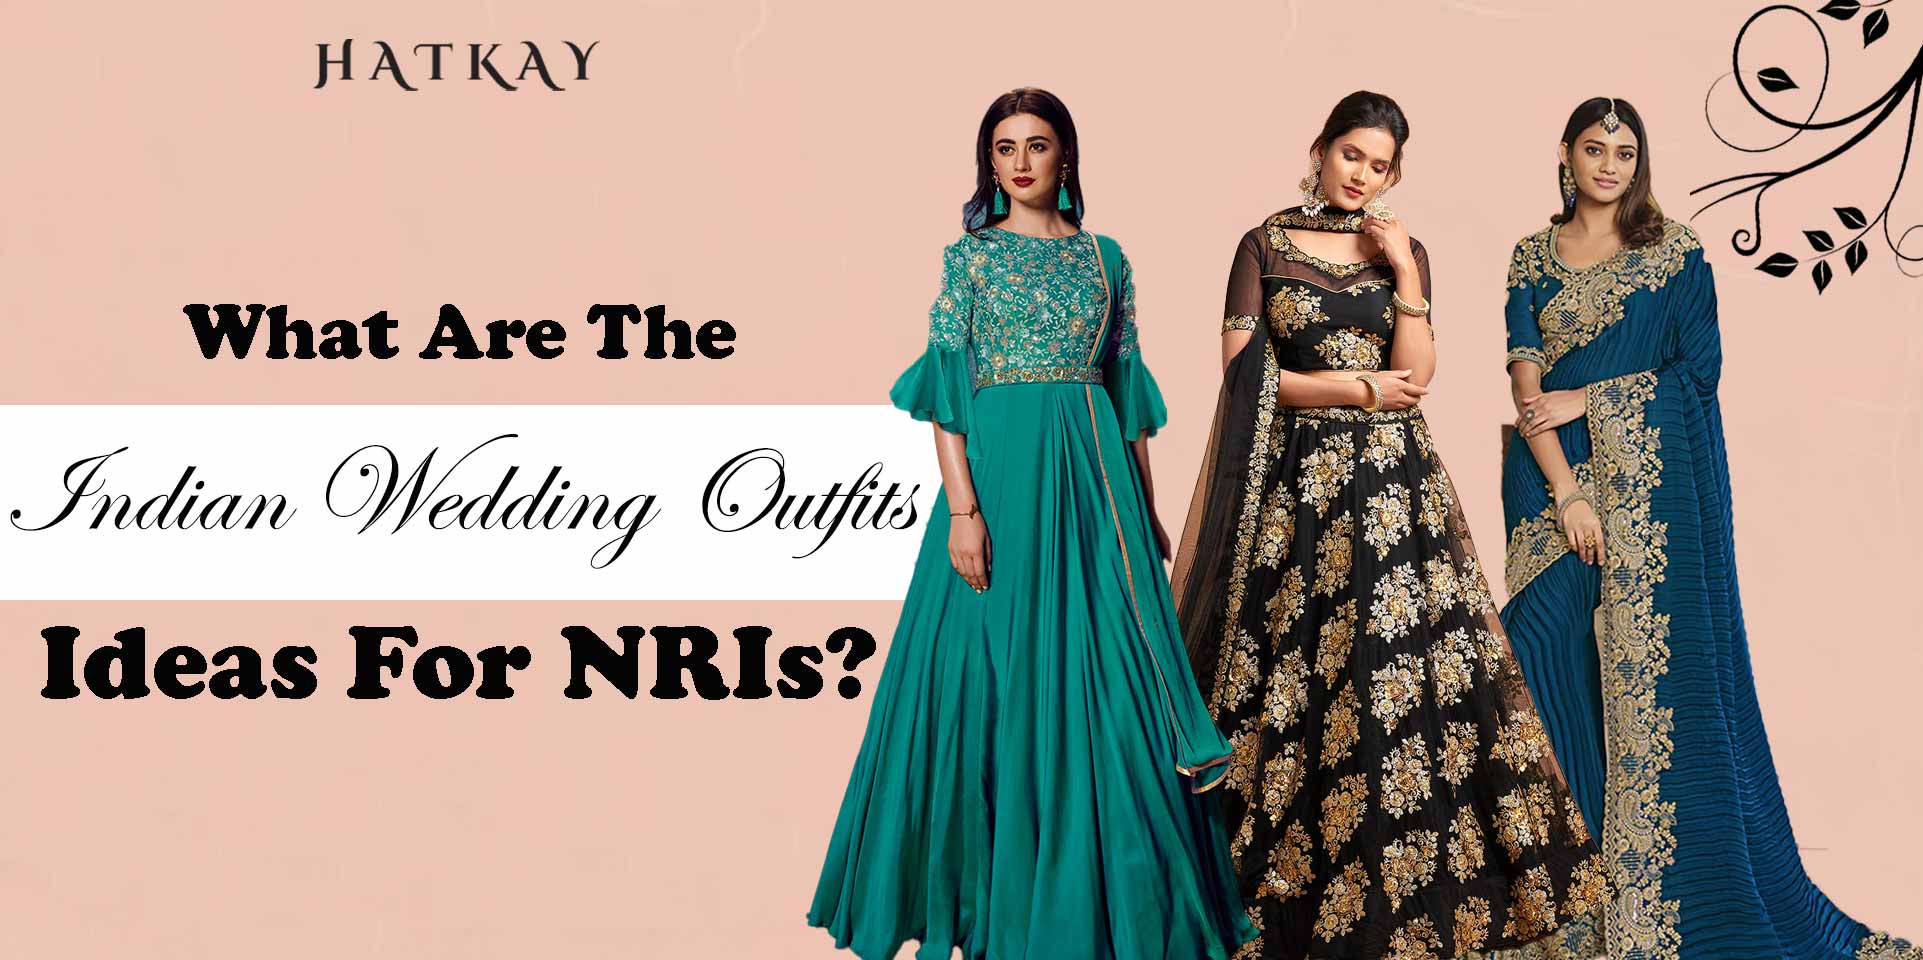 What are the Indian Wedding Outfits Ideas for NRIs?